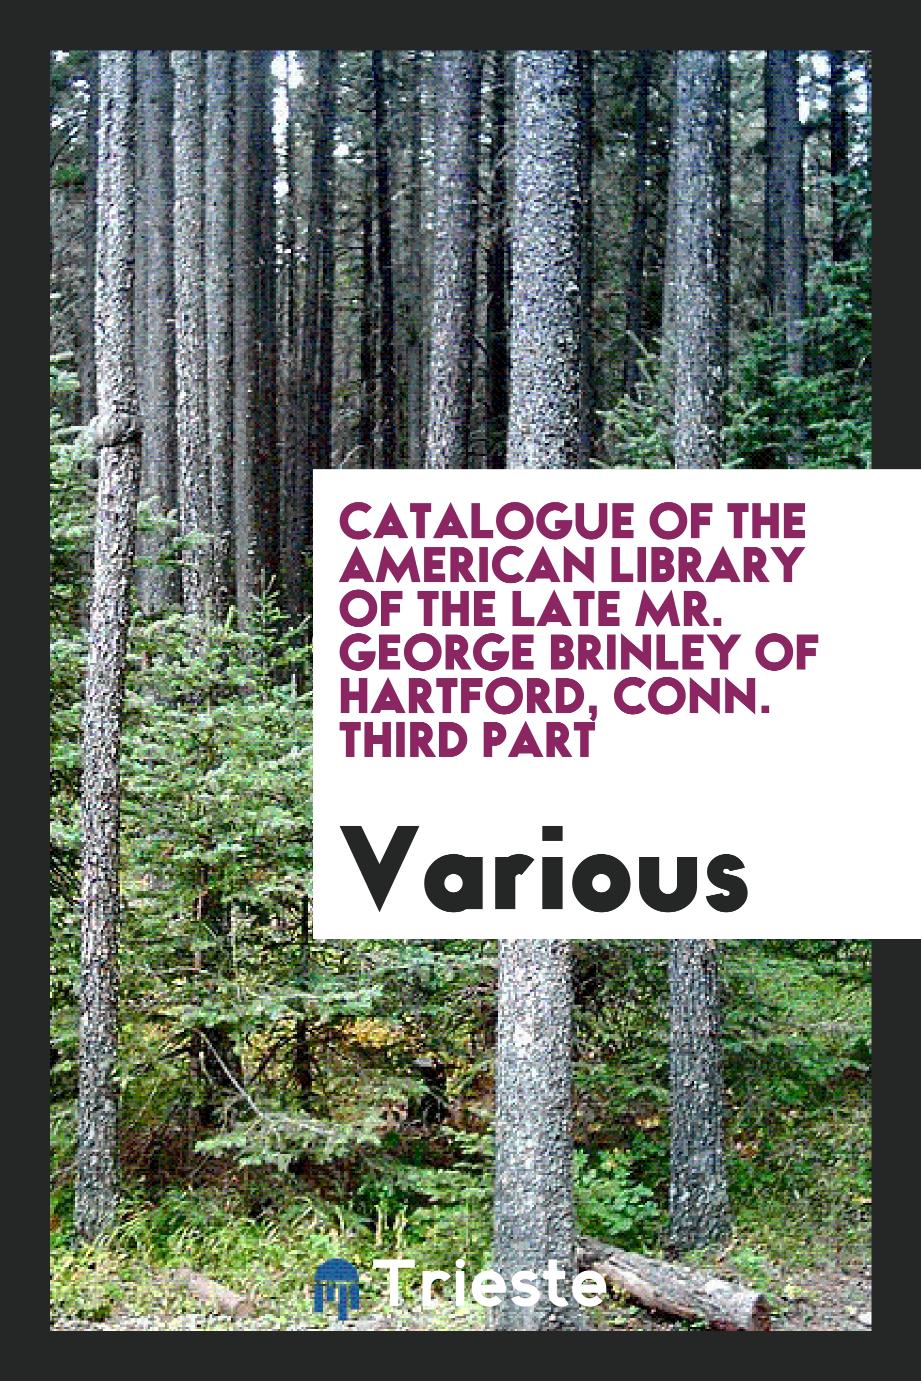 Catalogue of the American library of the late Mr. George Brinley of Hartford, Conn. Third part